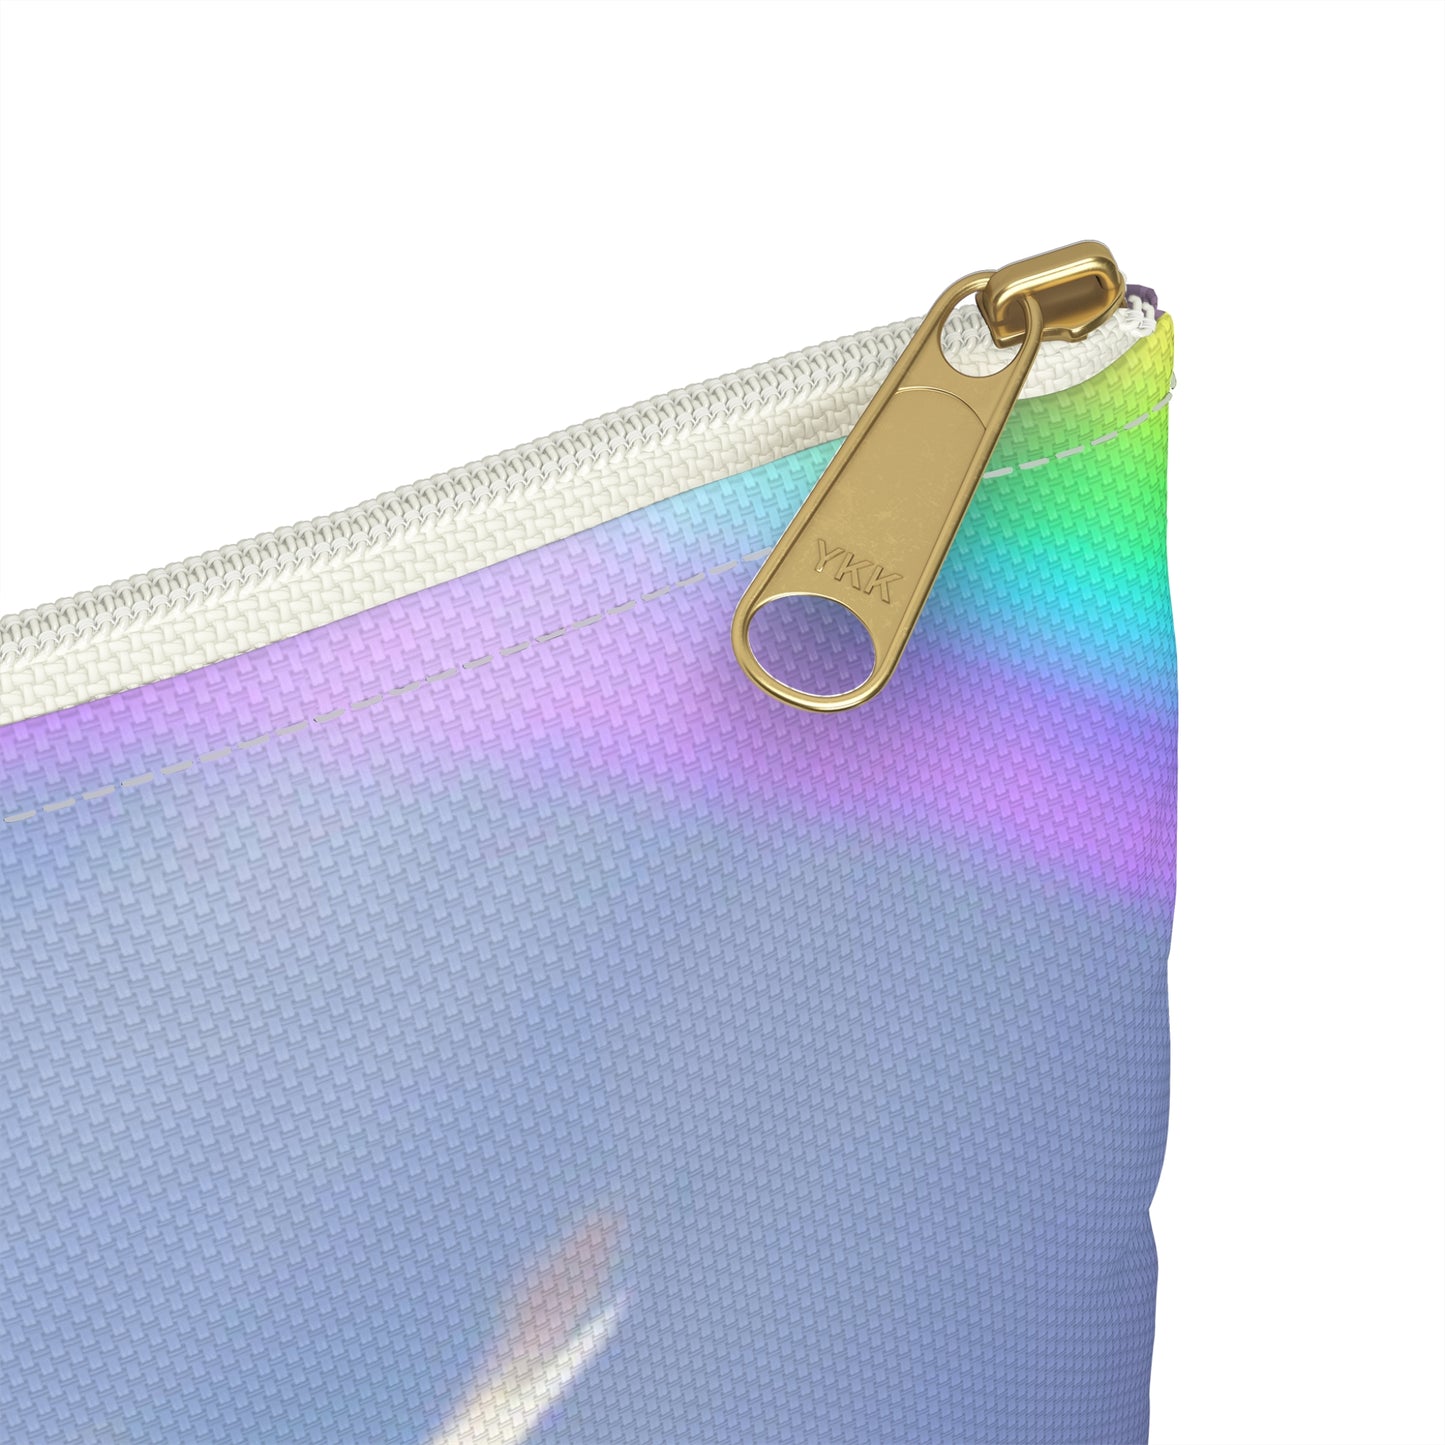 Christian Accessory Pouch / Jesus Accessory Pouch / Rainbow Accessory Pouch